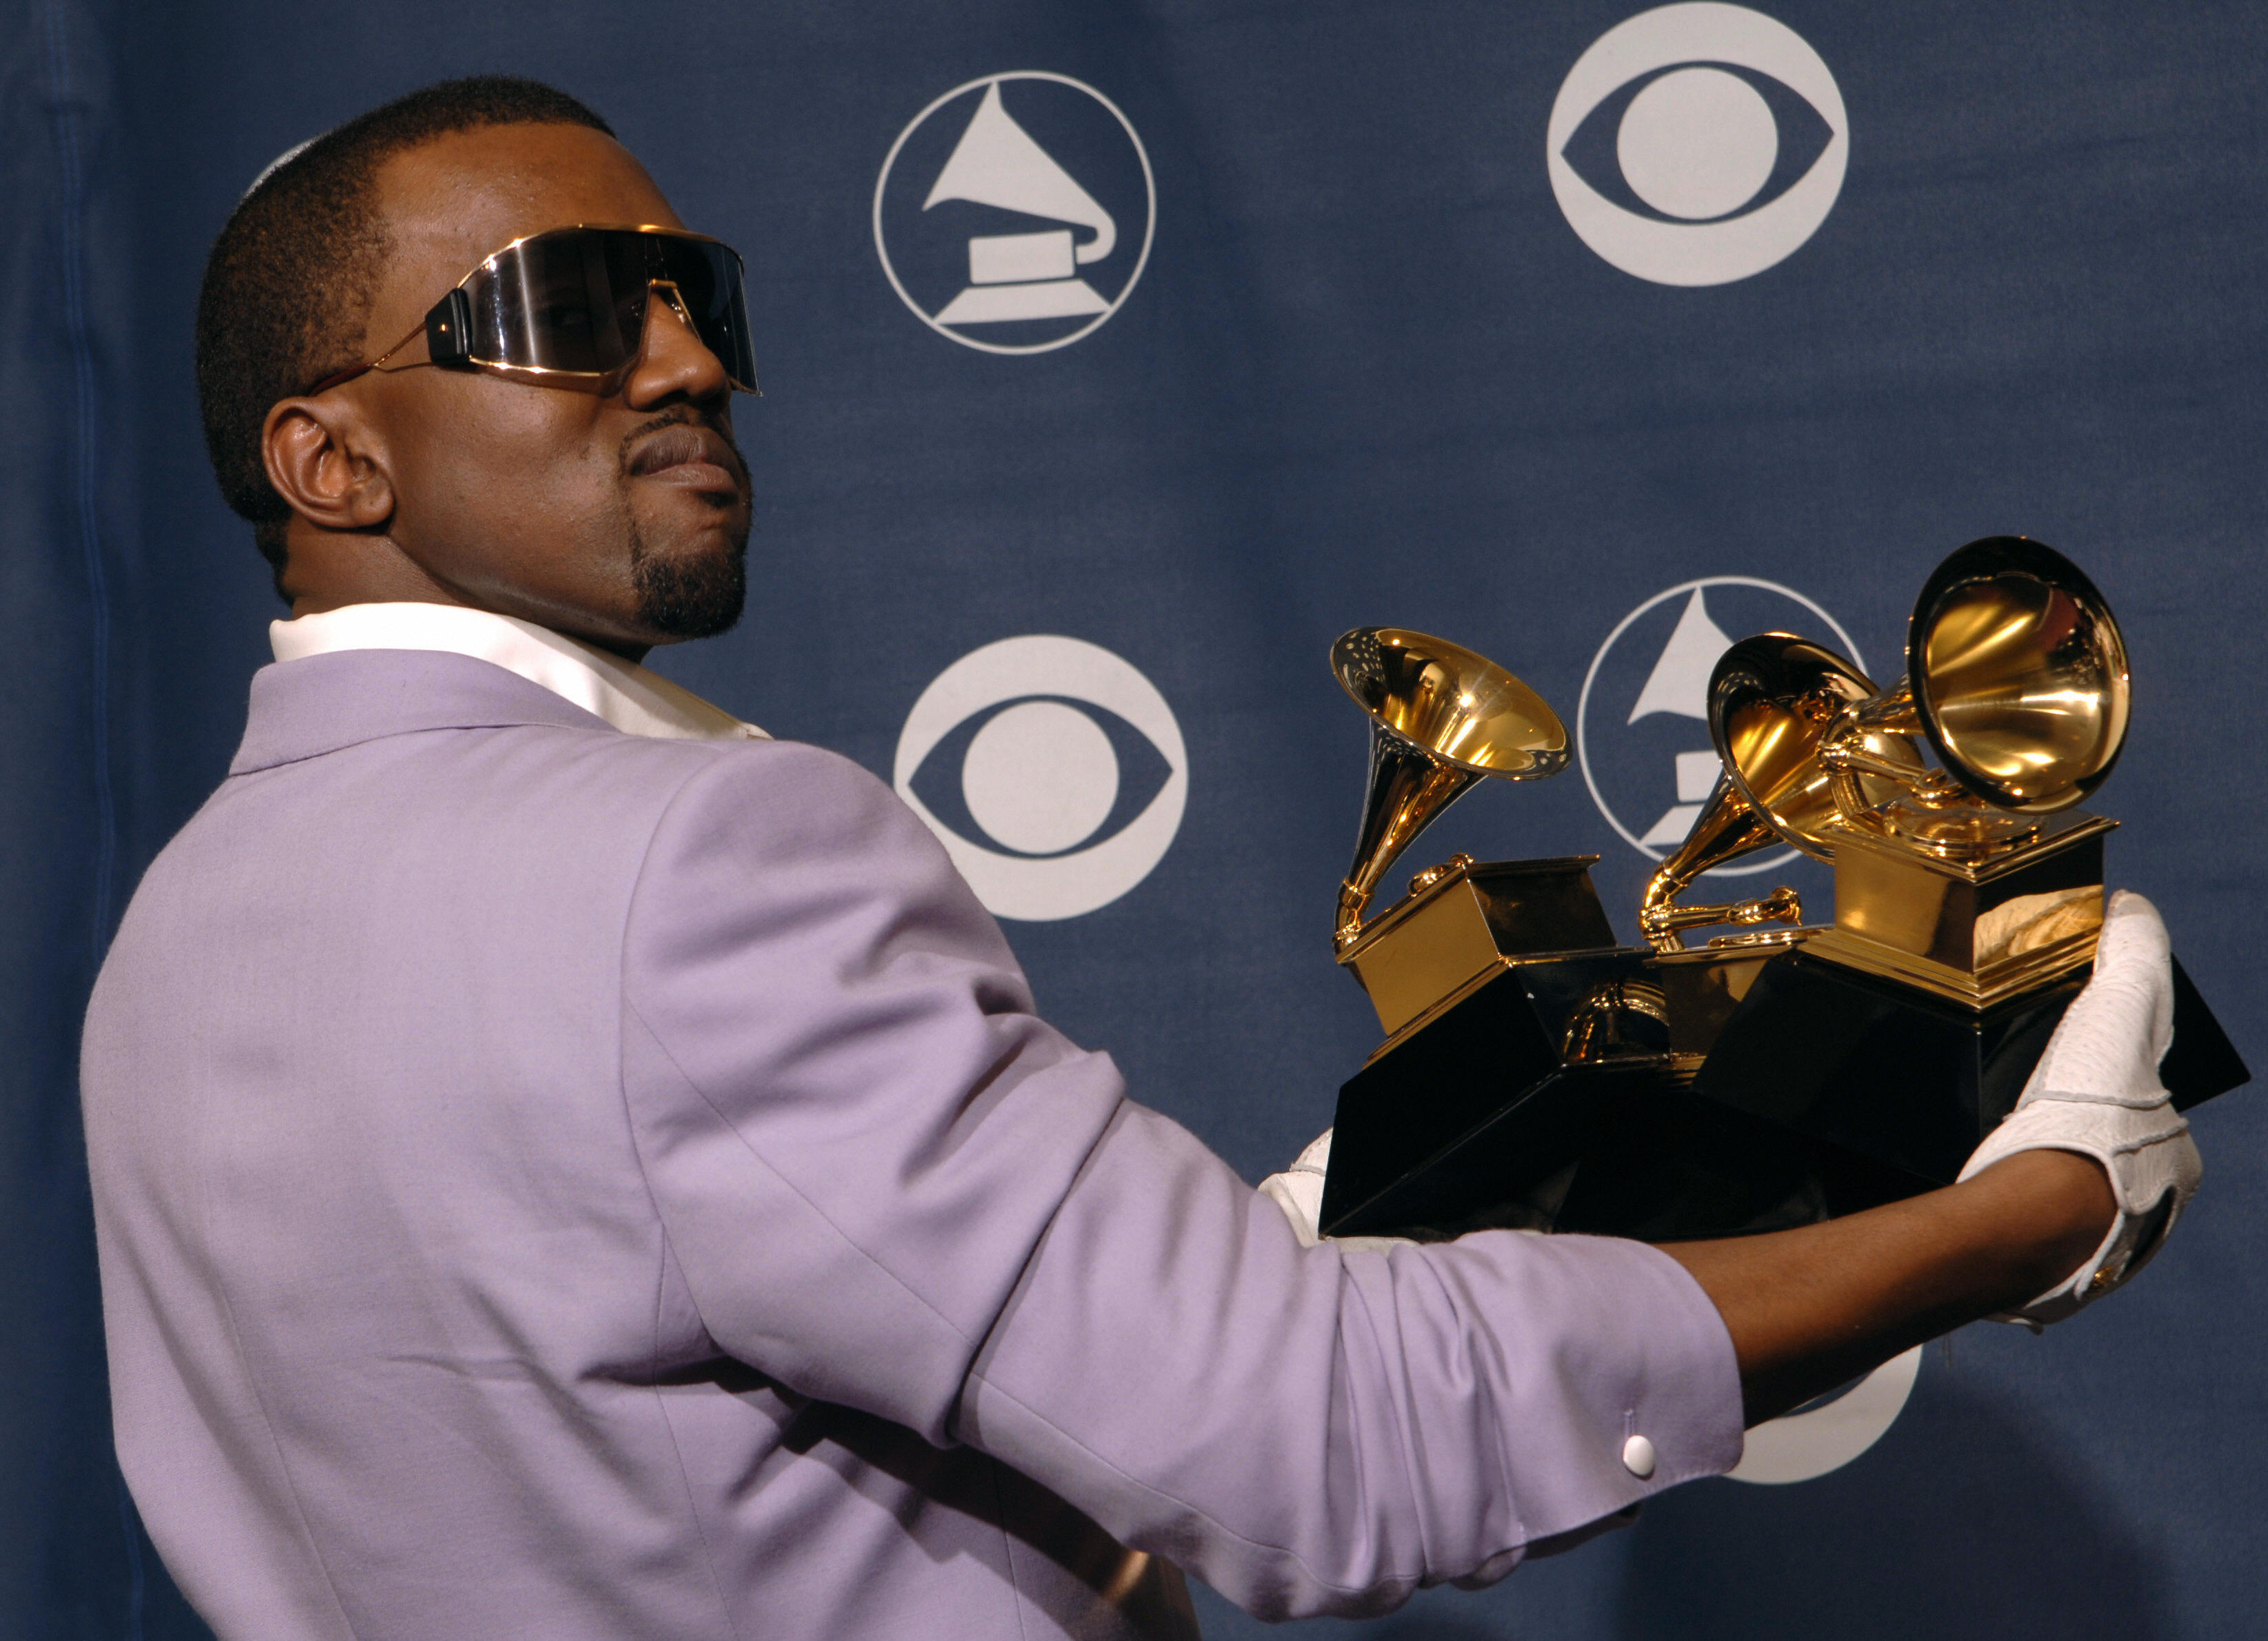 Los Angeles, UNITED STATES: US rapper Kanye West poses with the three awards he won at the Grammy Awards in Los Angeles 08 February 2006. West won for best rap solo performance, best rap song and best rap album. AFP PHOTO/Susan GOLDMAN (Photo credit should read SUSAN GOLDMAN/AFP/Getty Images)